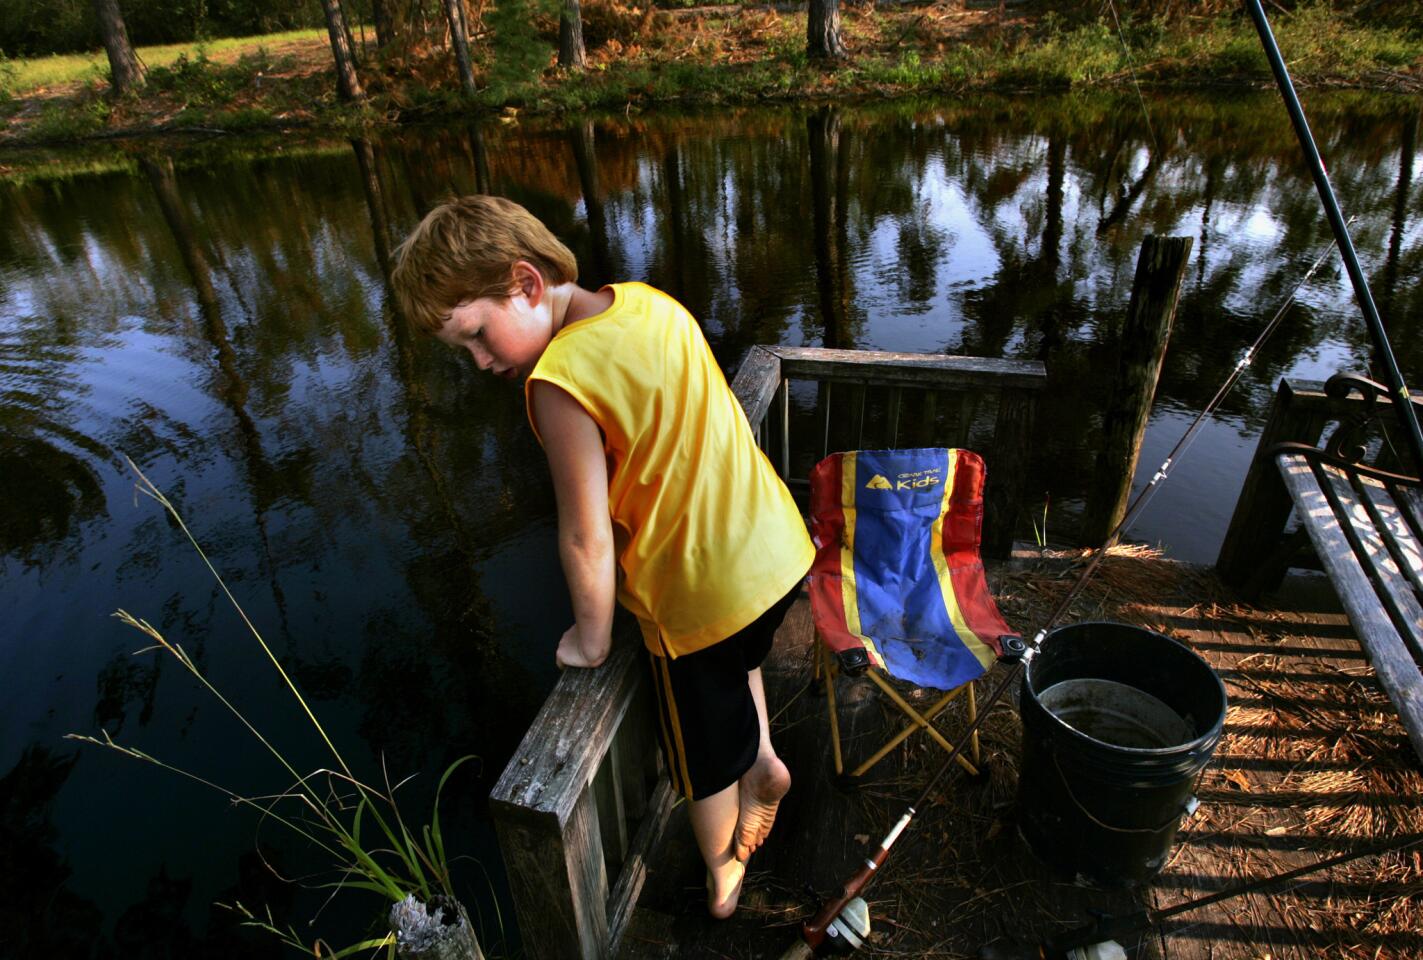 Dillion Chancey looks for fish in the dark waters of a pond at his aunt's home, where he is staying while his parents try to put their lives back together after Hurricane Katrina. Dillion and his parents, Bobby Chancey and Sarah Fairchild, were floating in the hurricane waters for 12 hours when the storm hit their home in Biloxi, Miss.